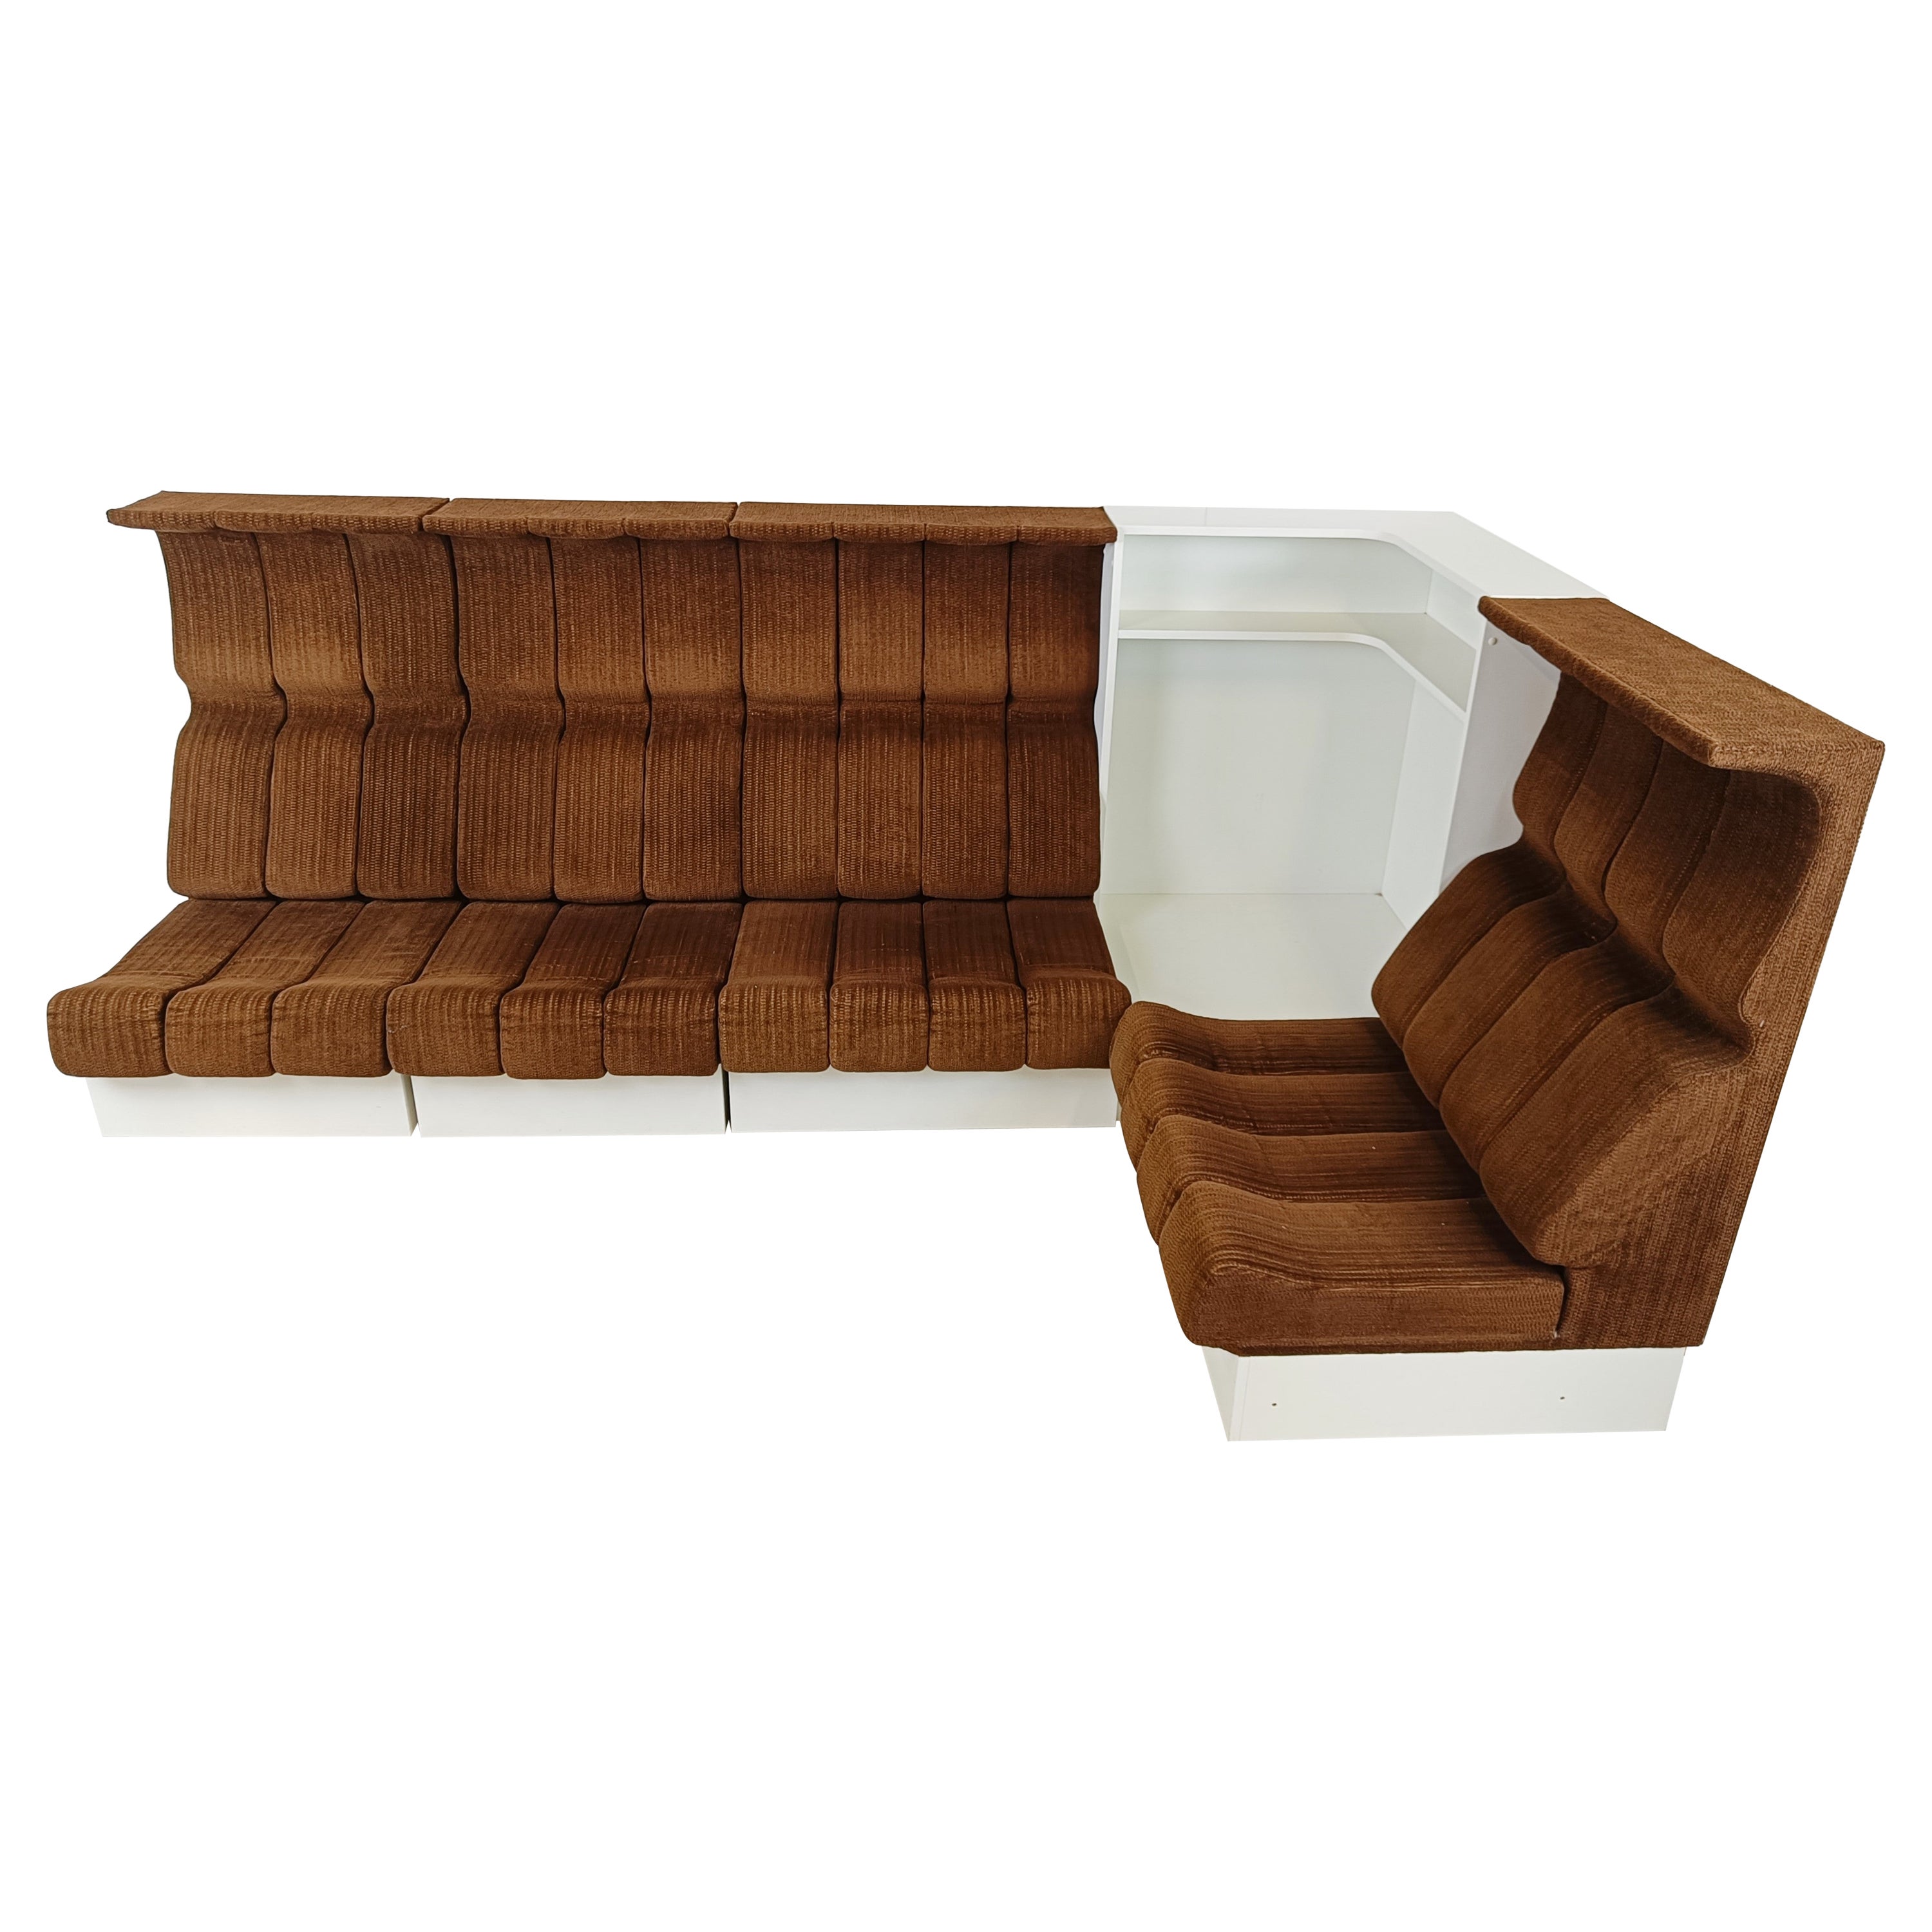 Space Age Sofa by Interlübke, 1970s For Sale